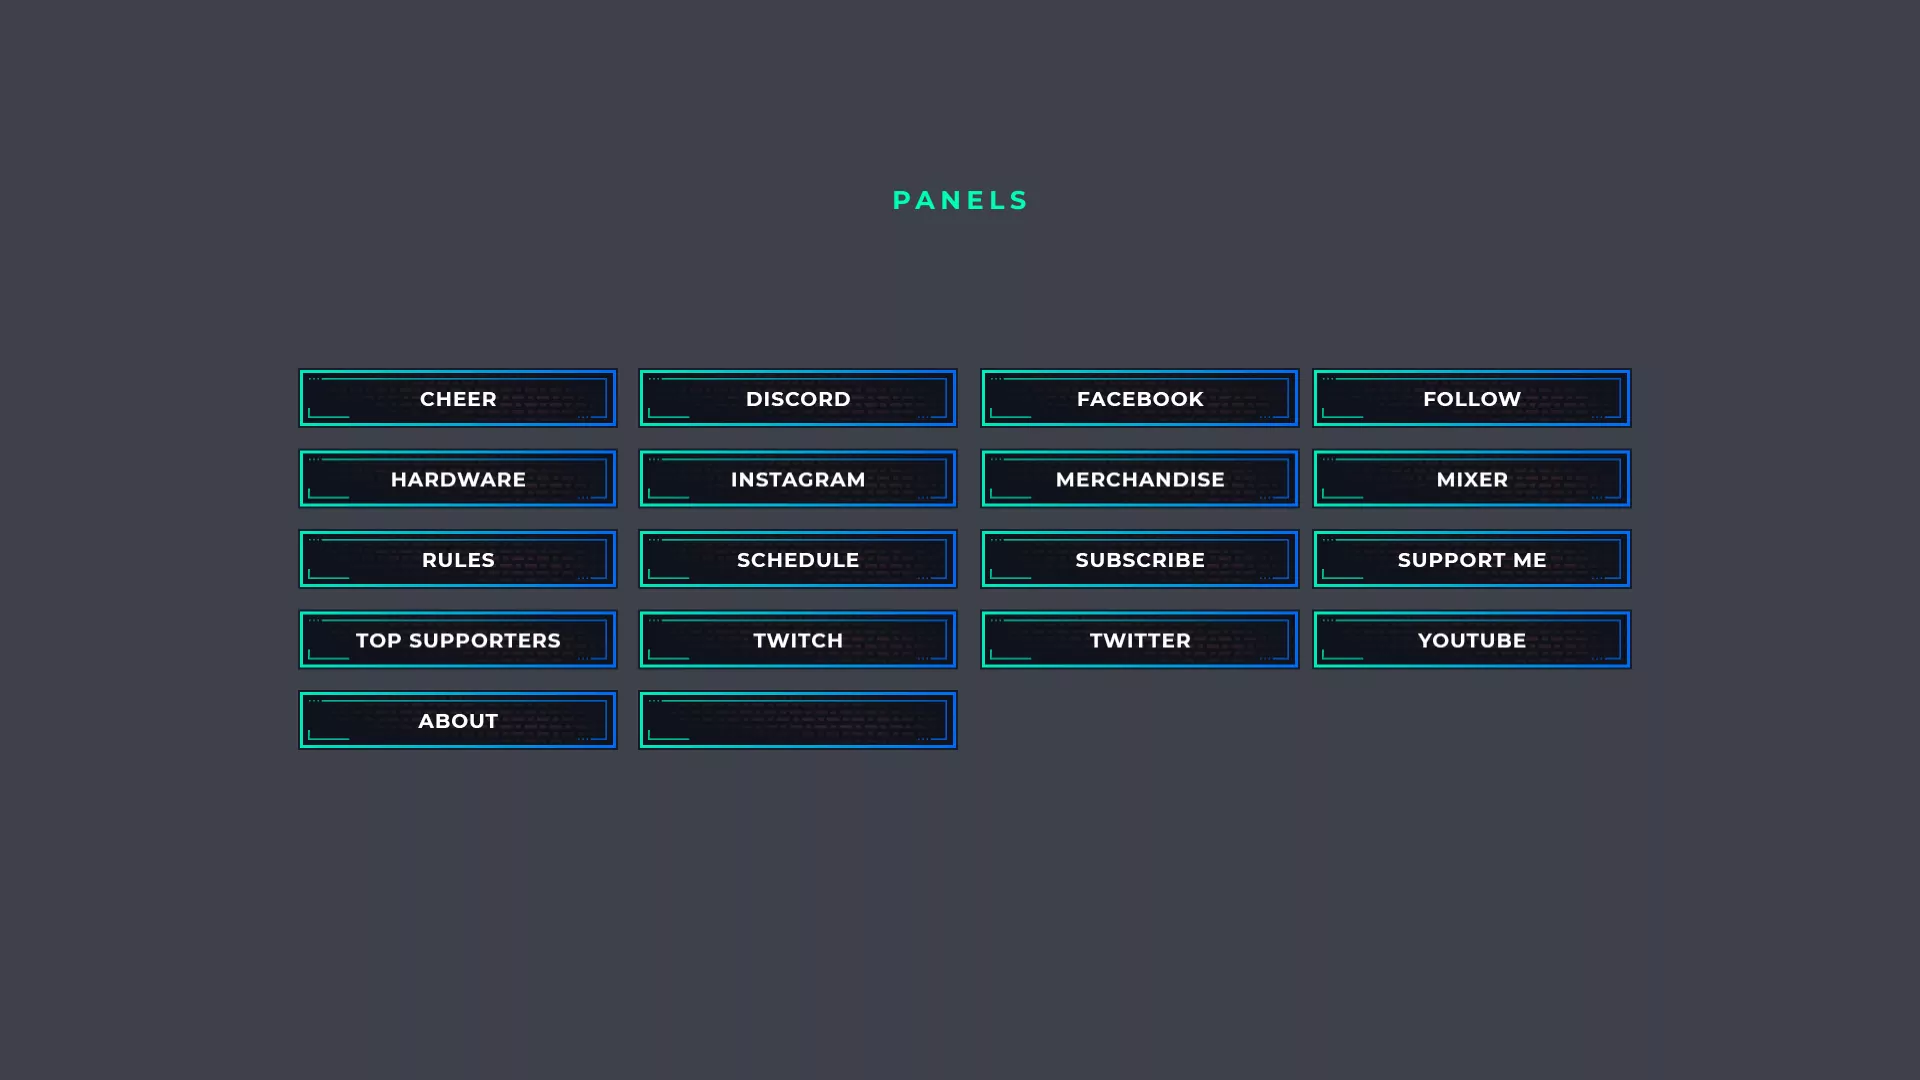 Borderline Twitch and Mixer Panels